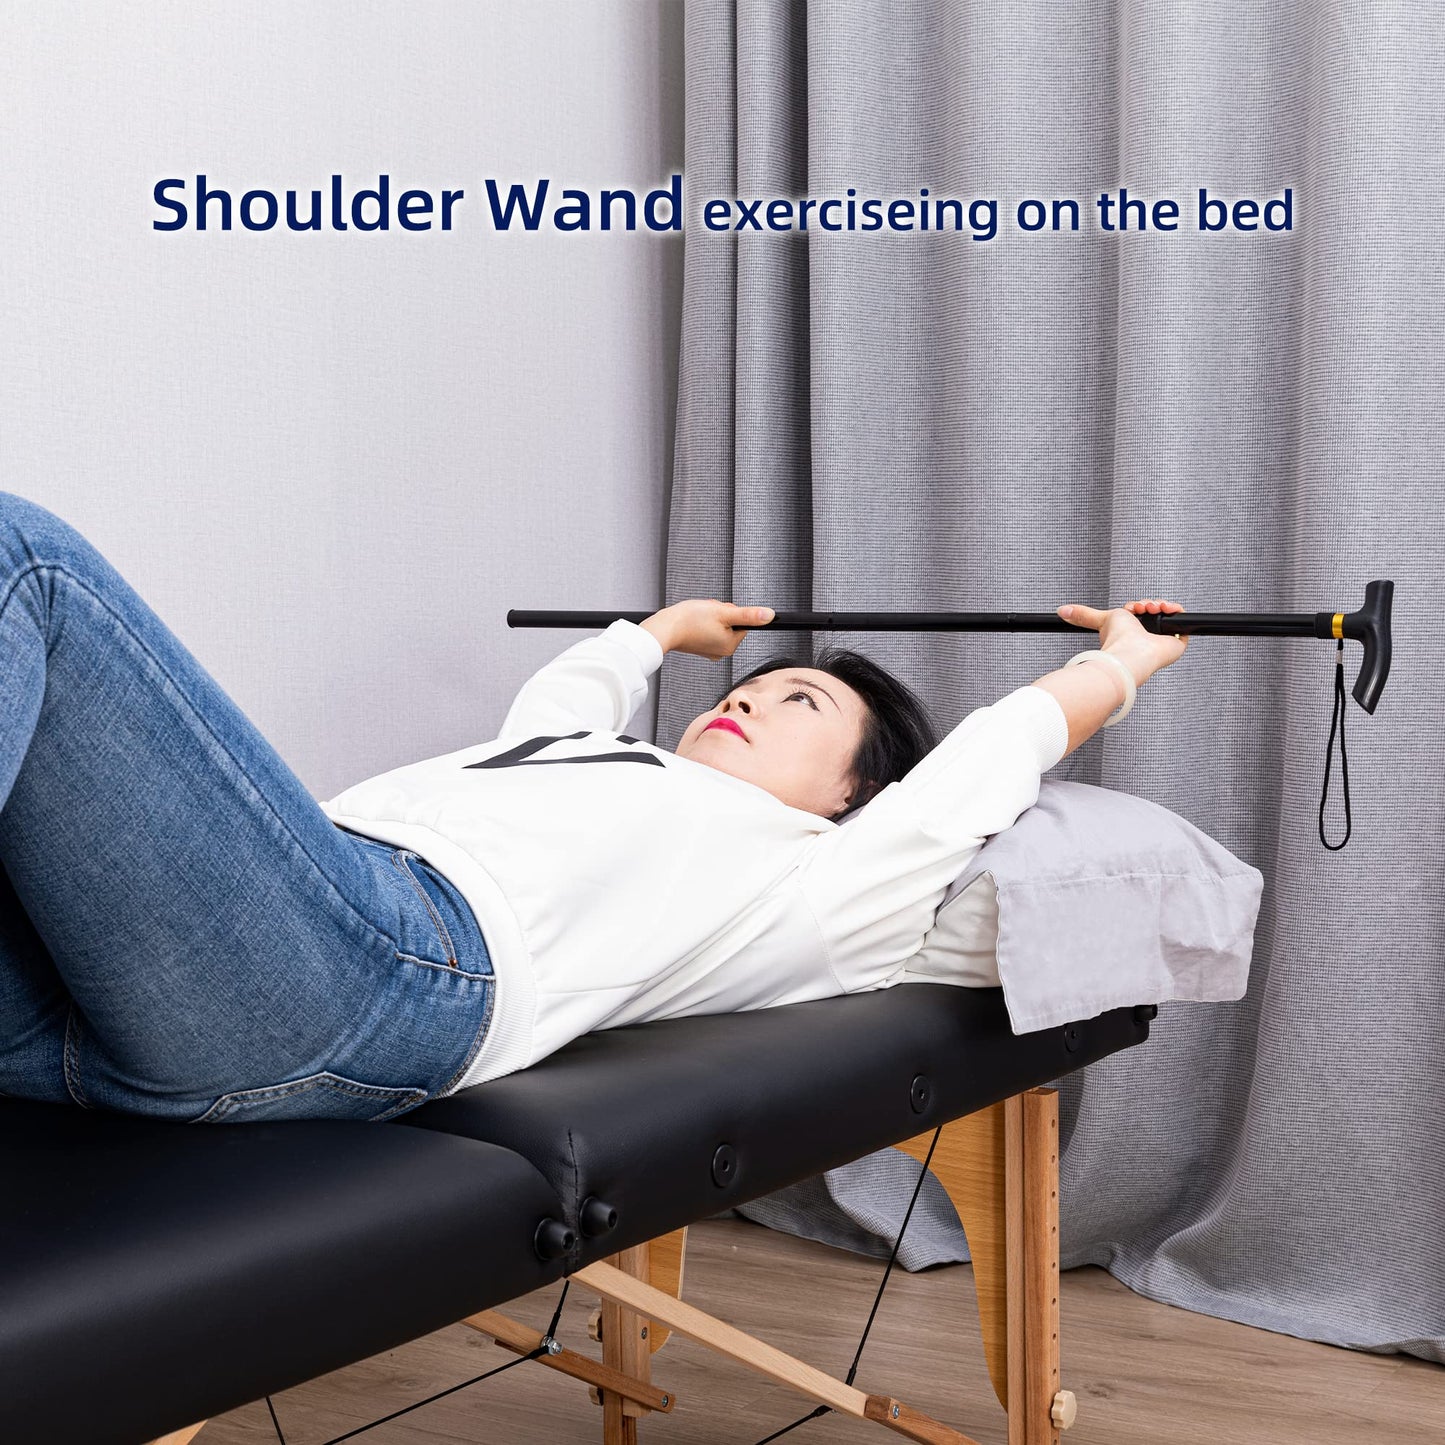 Shoulder Wand Therapy Stretching Tool, Collapsible Stretching Bar, Black Stretching Stick, Shoulder & Rotator Cuff Exercise Equipment Physical Therapy Tool for Recovery and Increasing Motion